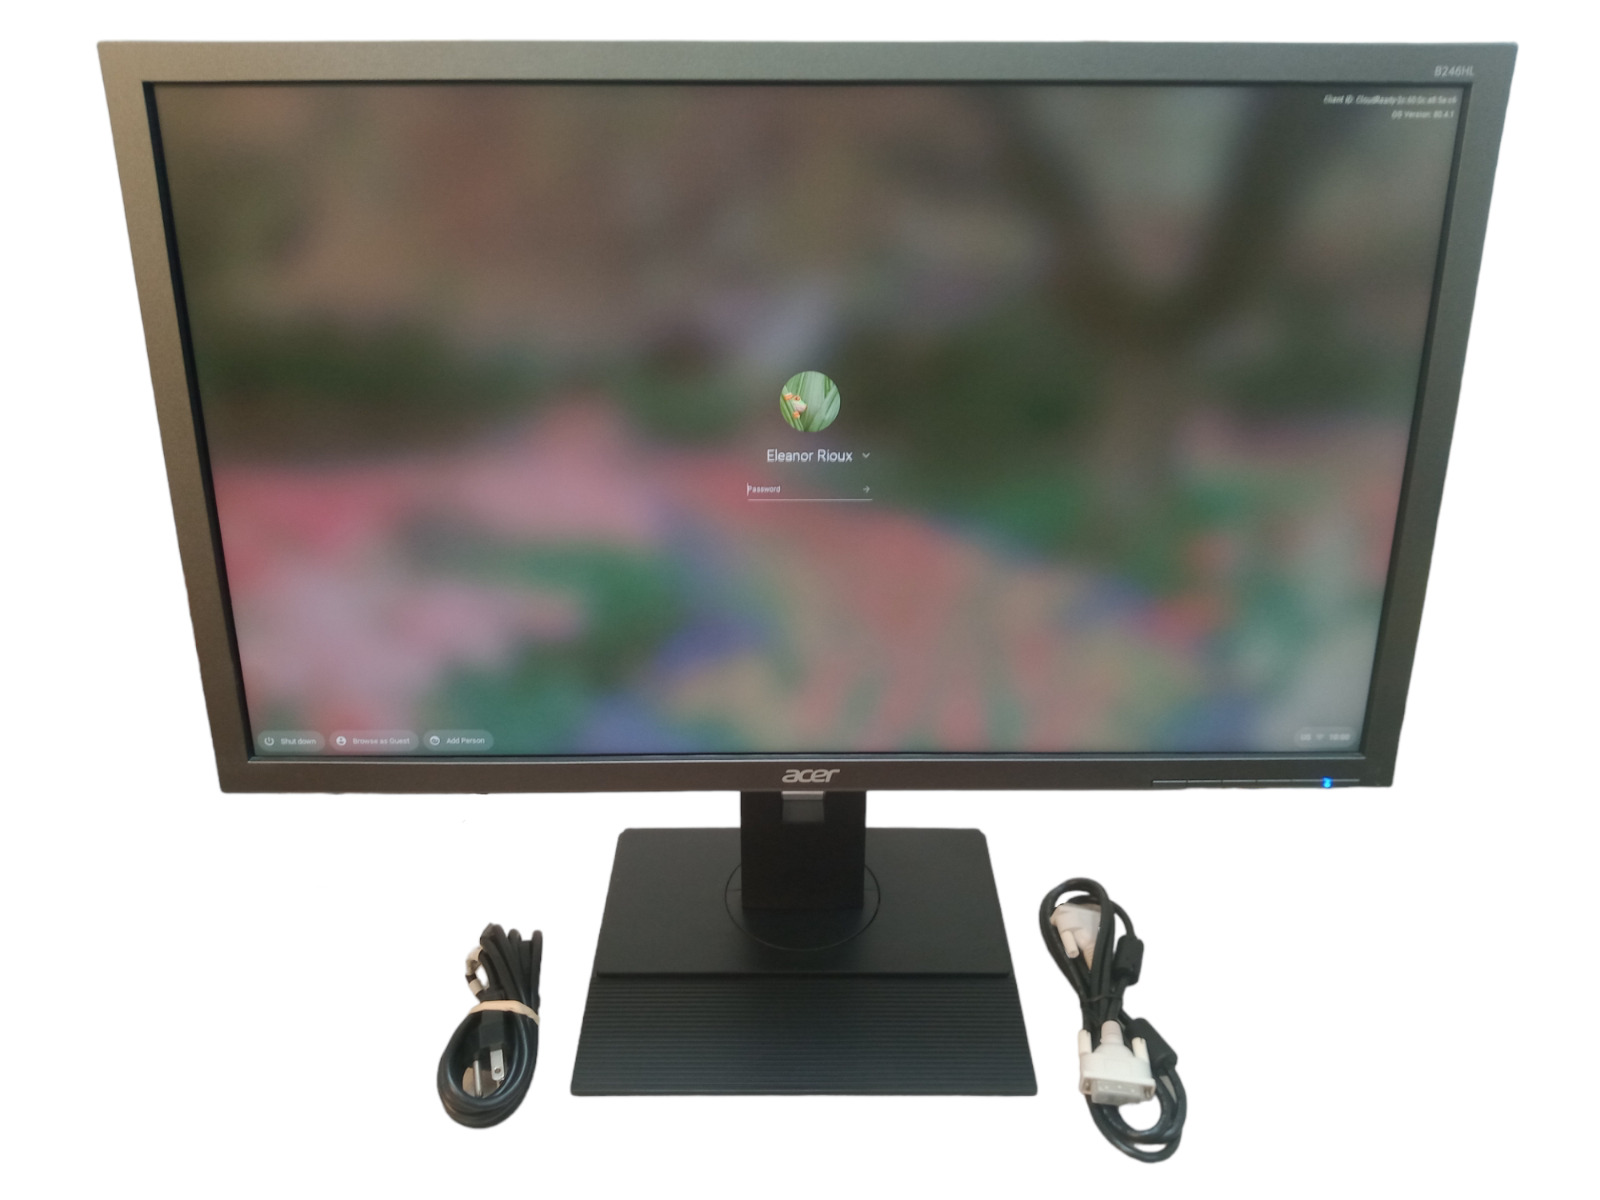 Acer B246HL ymdpr 24in HD LED LCD Widescreen TN Film Desktop Monitor w/ Stand